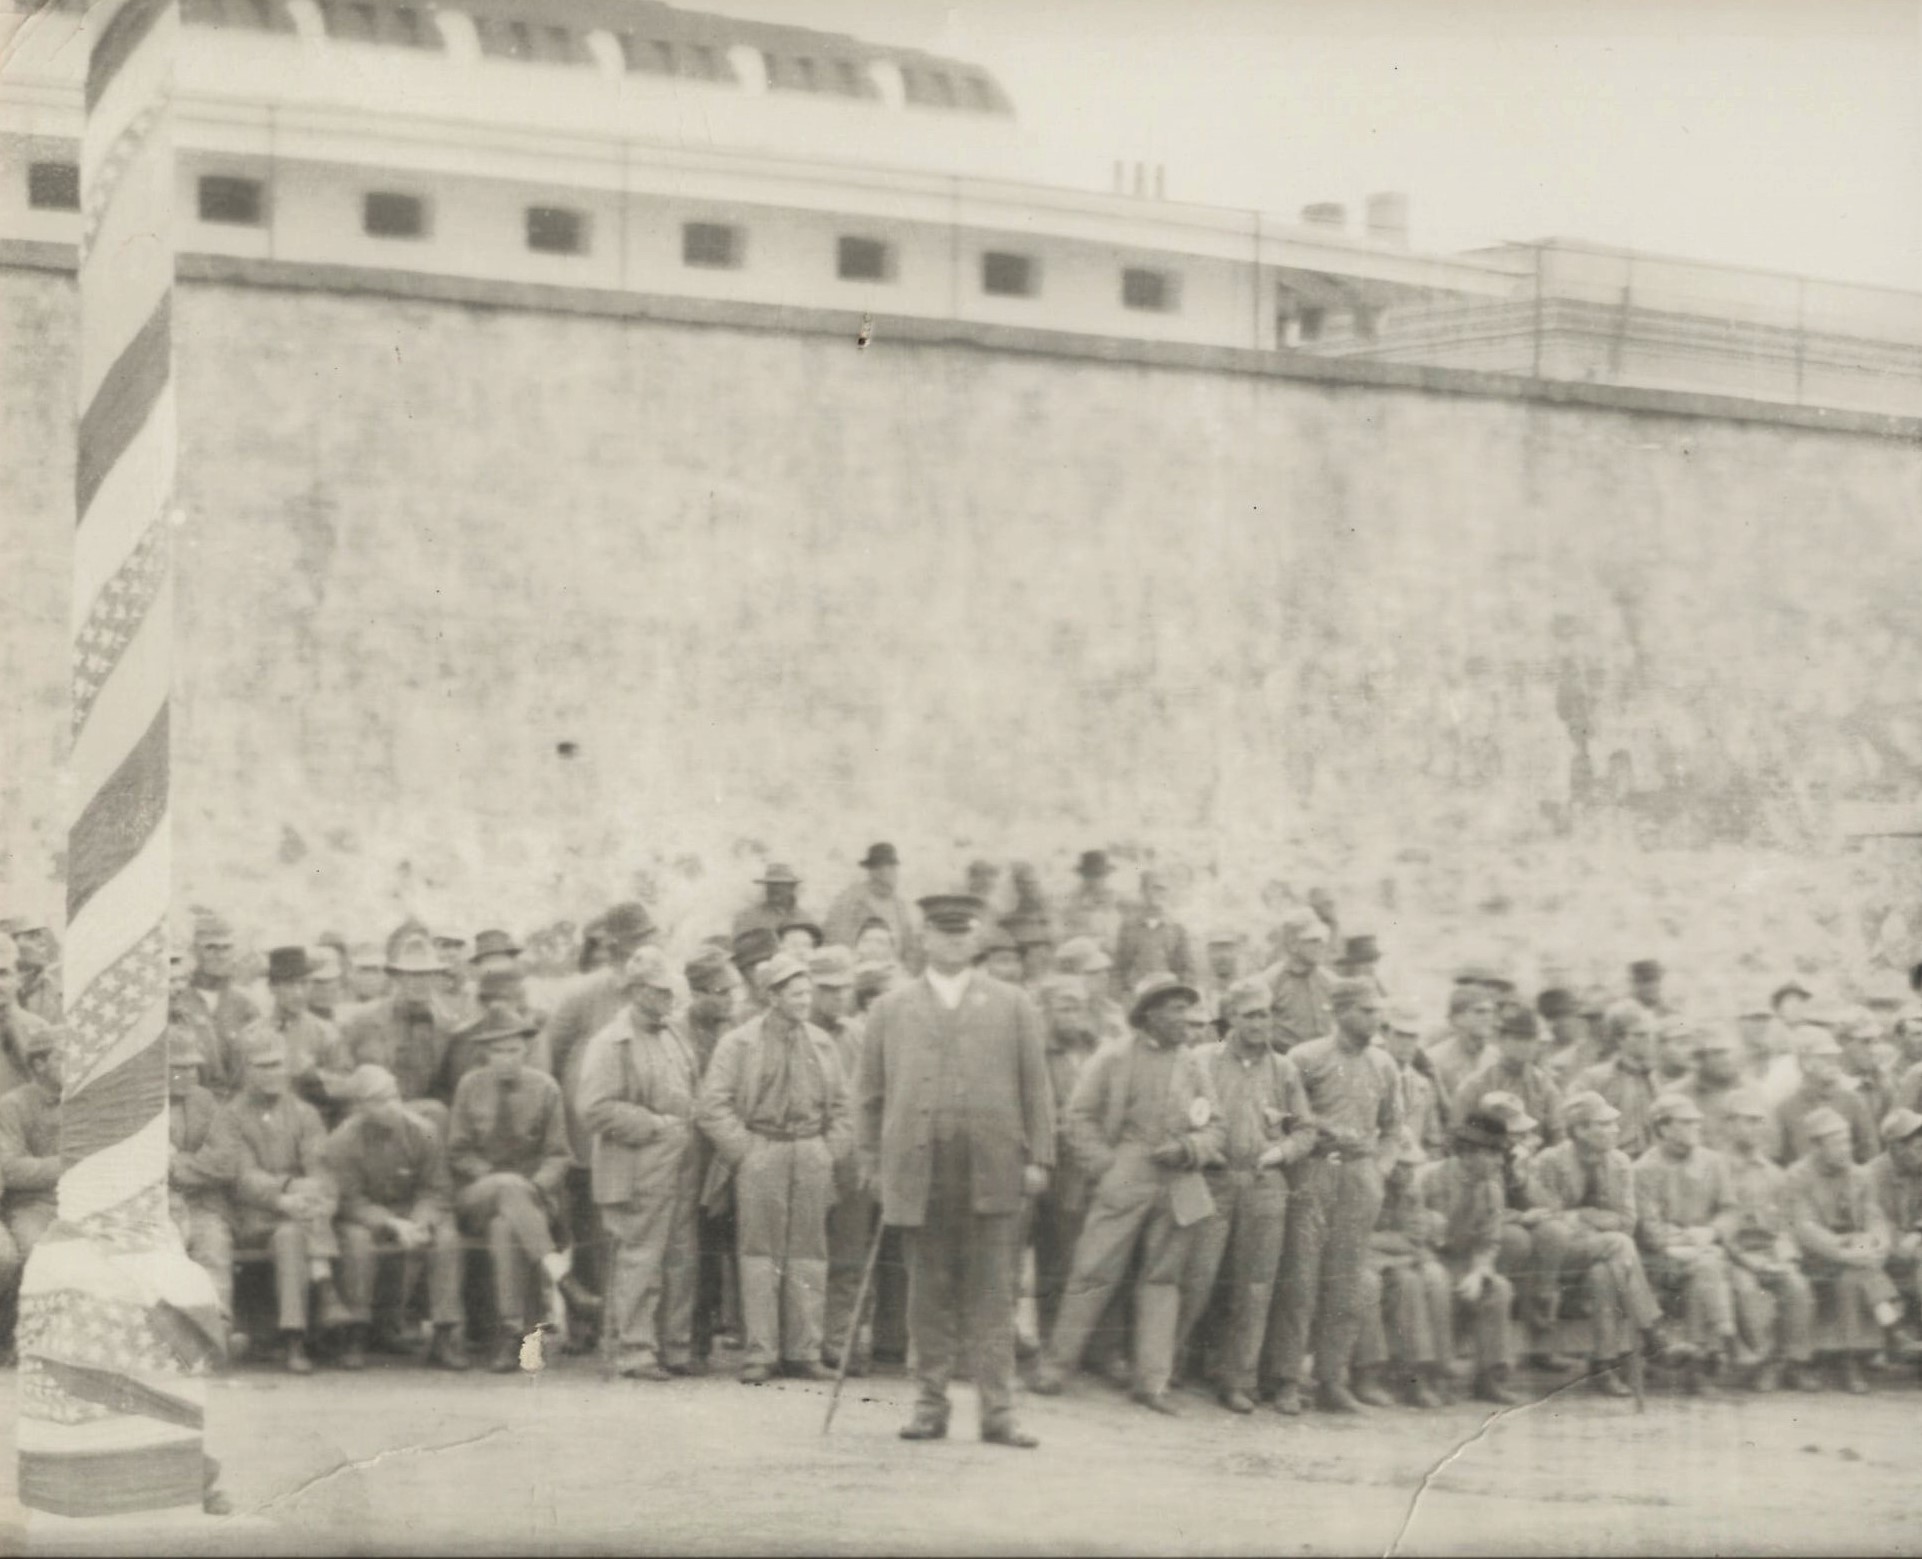 San Quentin inmates watch a baseball game under the supervision of a guard.